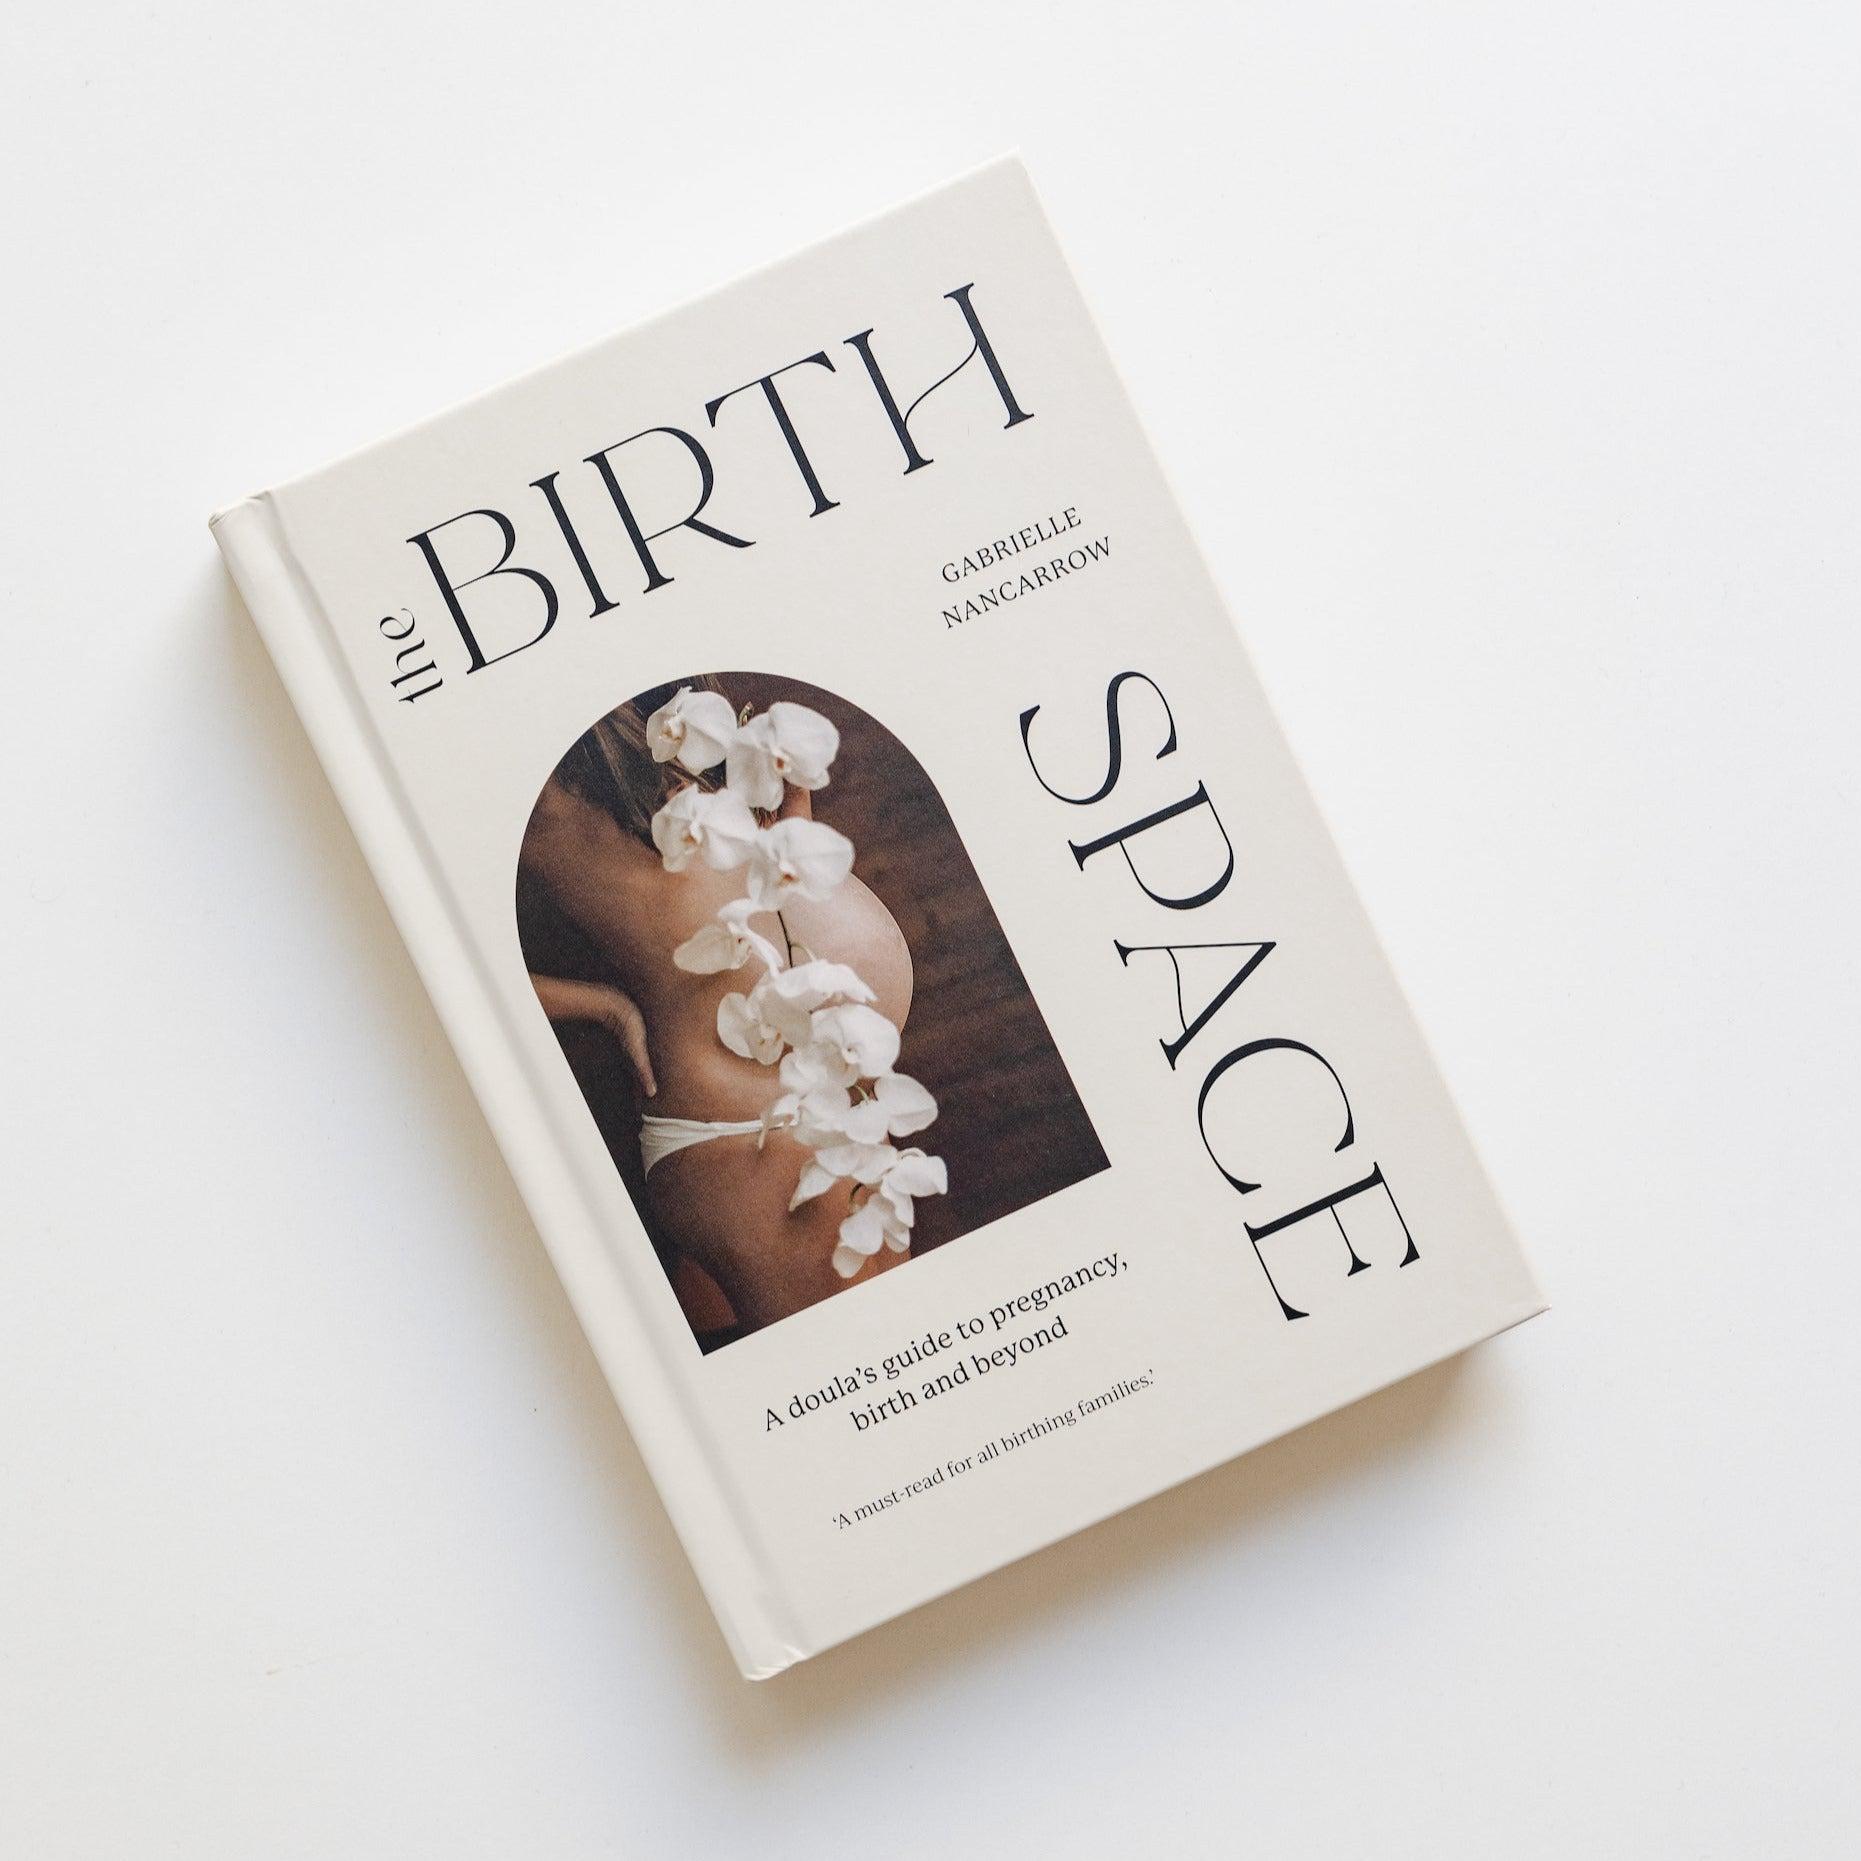 Written by Gather founder, mother of three and birth doula Gabrielle Nancarrow, The Birth Space is rich with comprehensive information about the birthing landscape that will empower you to choose the path to parenthood that feels right to you – whether that be a hospital, home or birth centre birth.